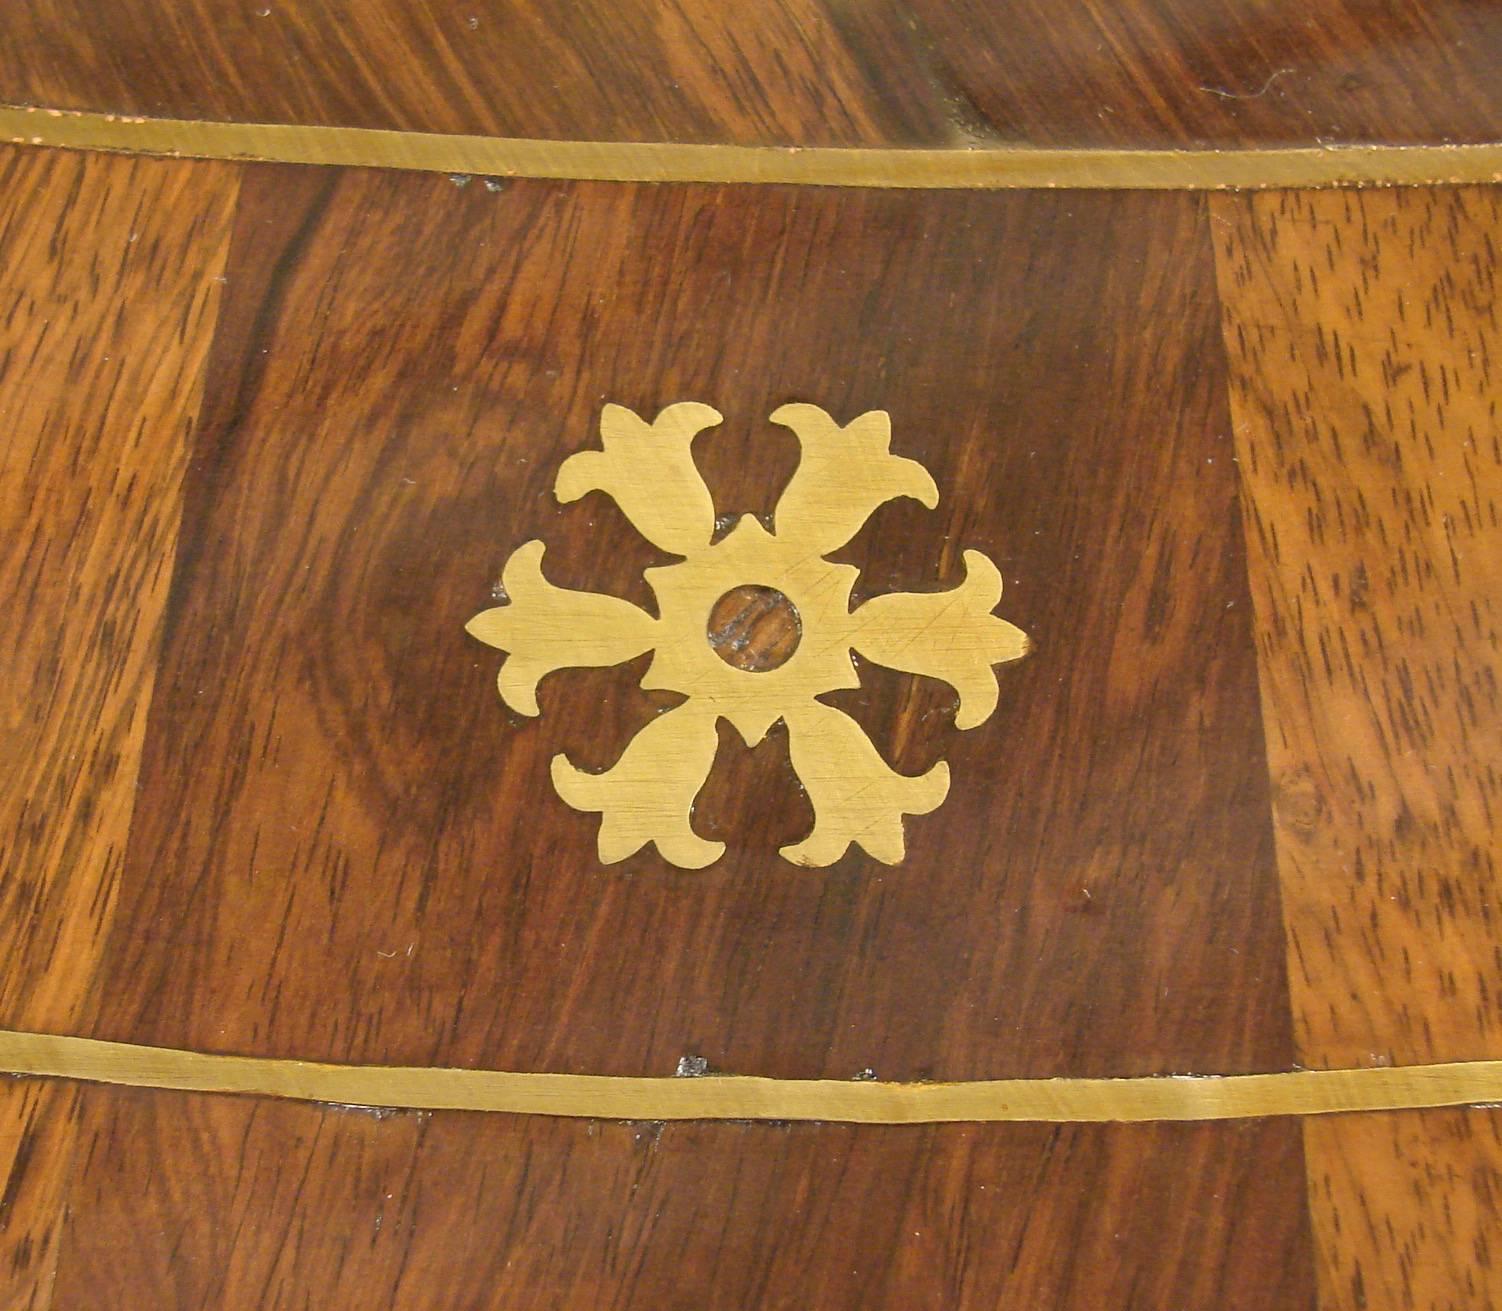 Regency Brass-Inlaid Center Table with Triangular Base and Animal Paw Feet 1